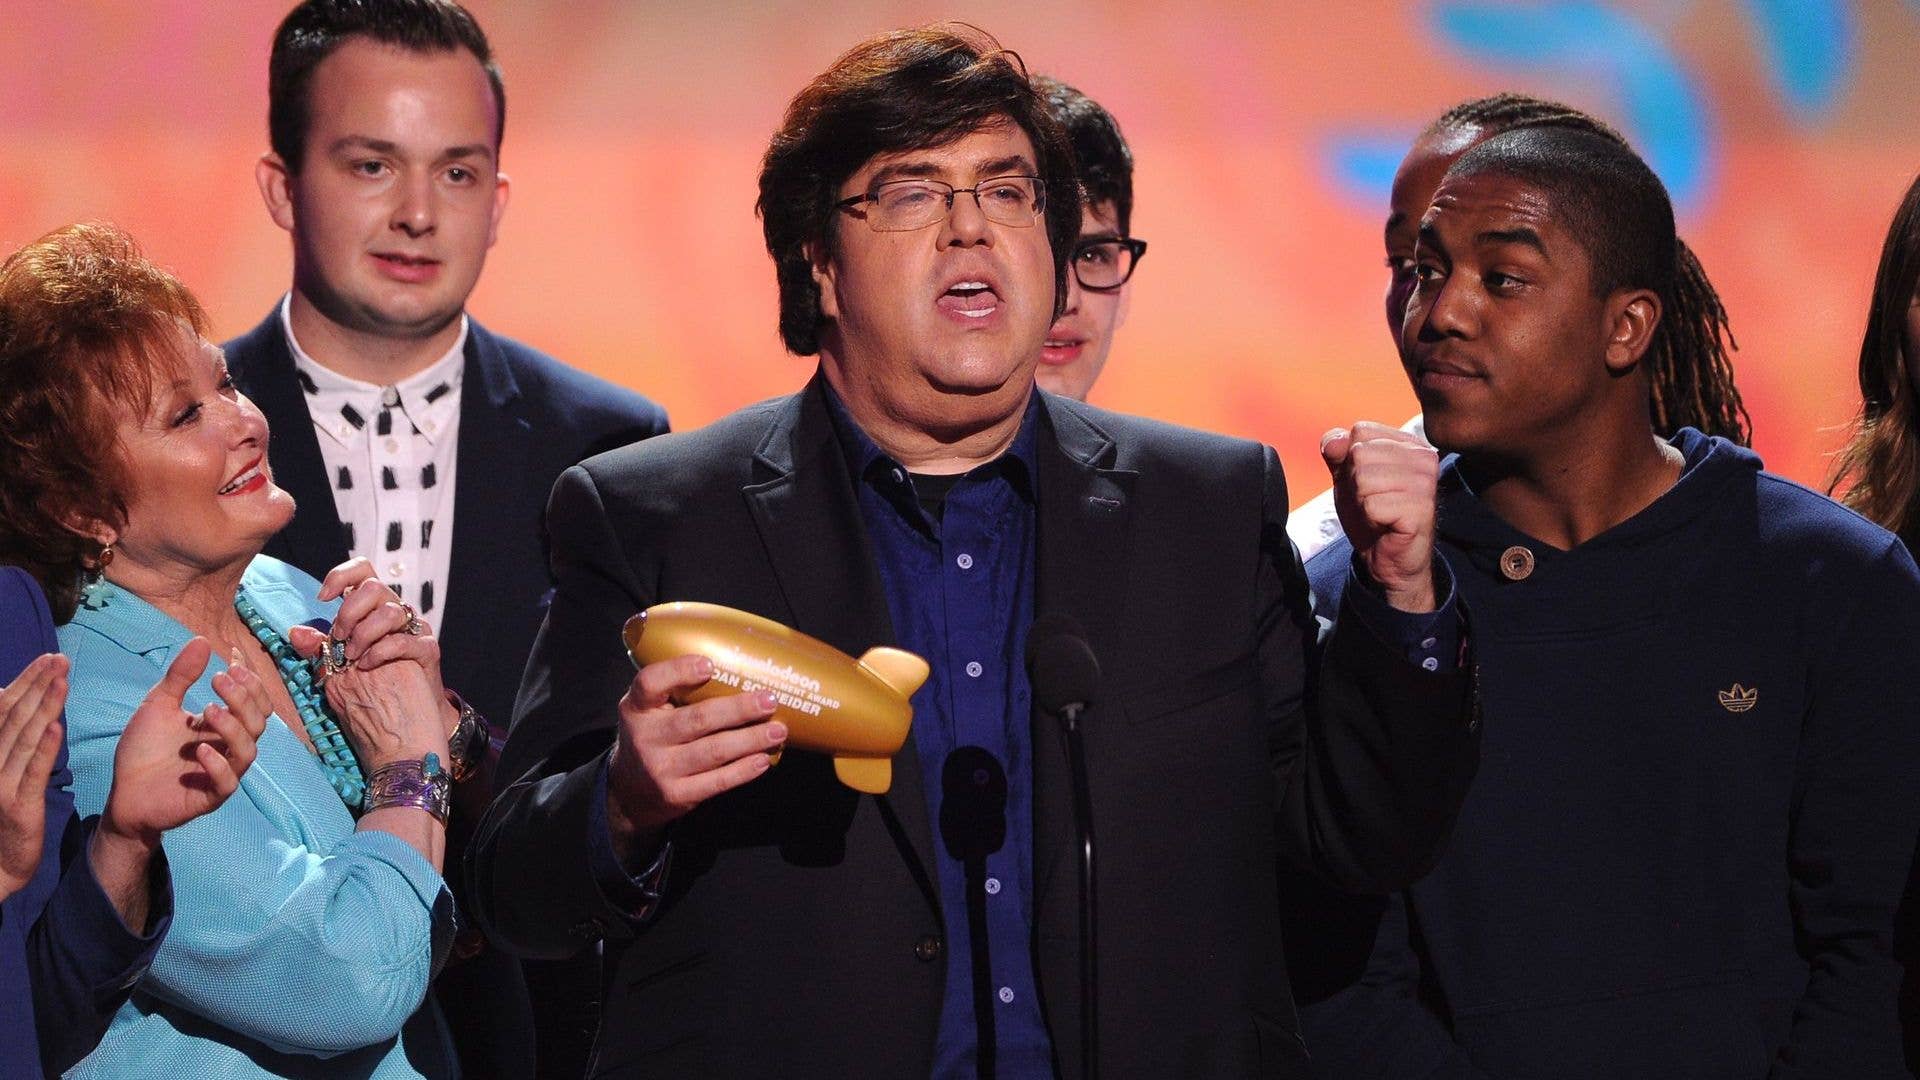 Dan Schneider Says Foot Comedy in Nickelodeon Shows Was 'Totally